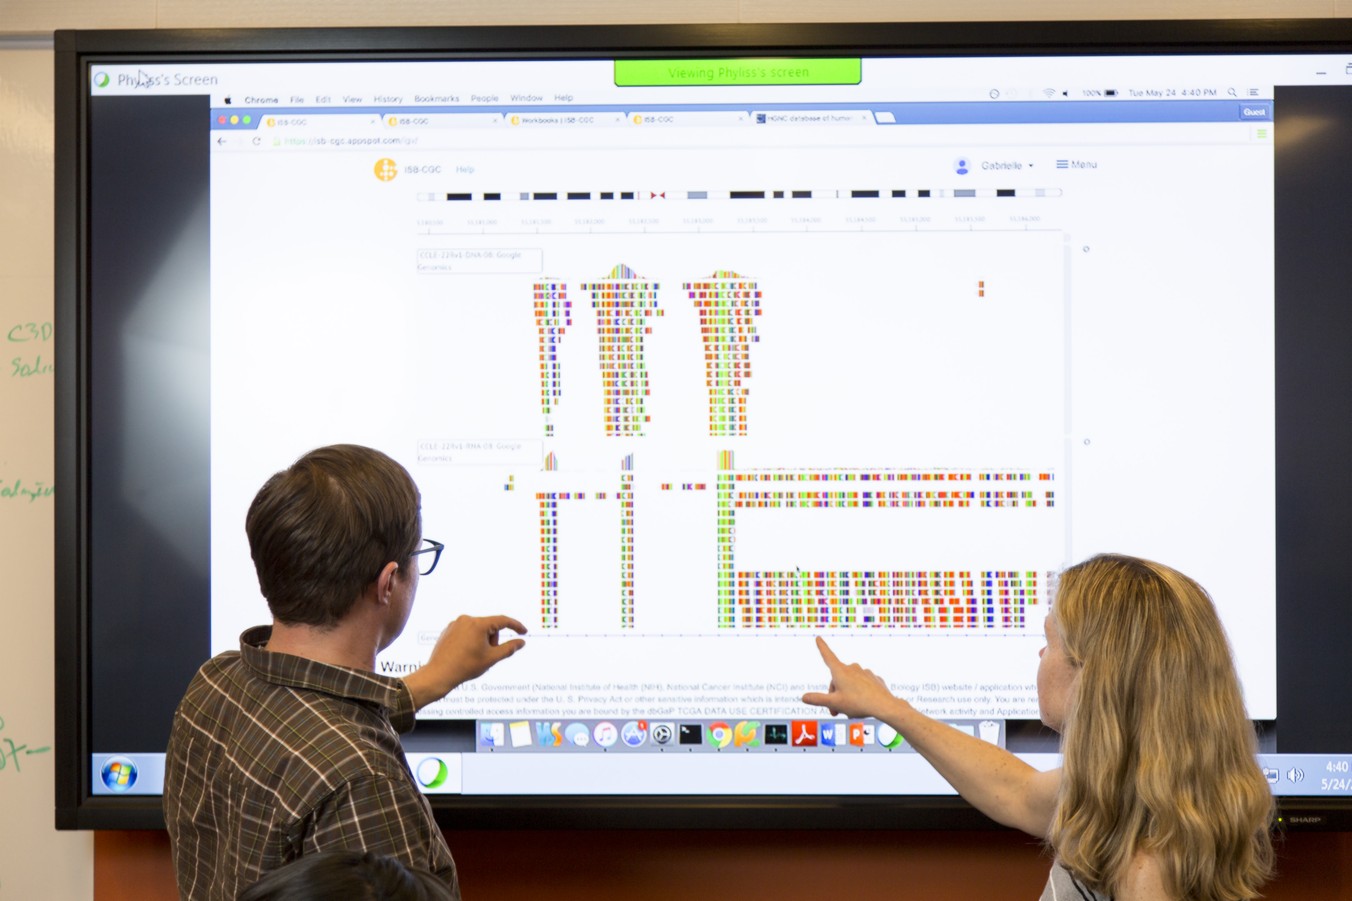 Researchers reviewing and sharing data on a projector screen